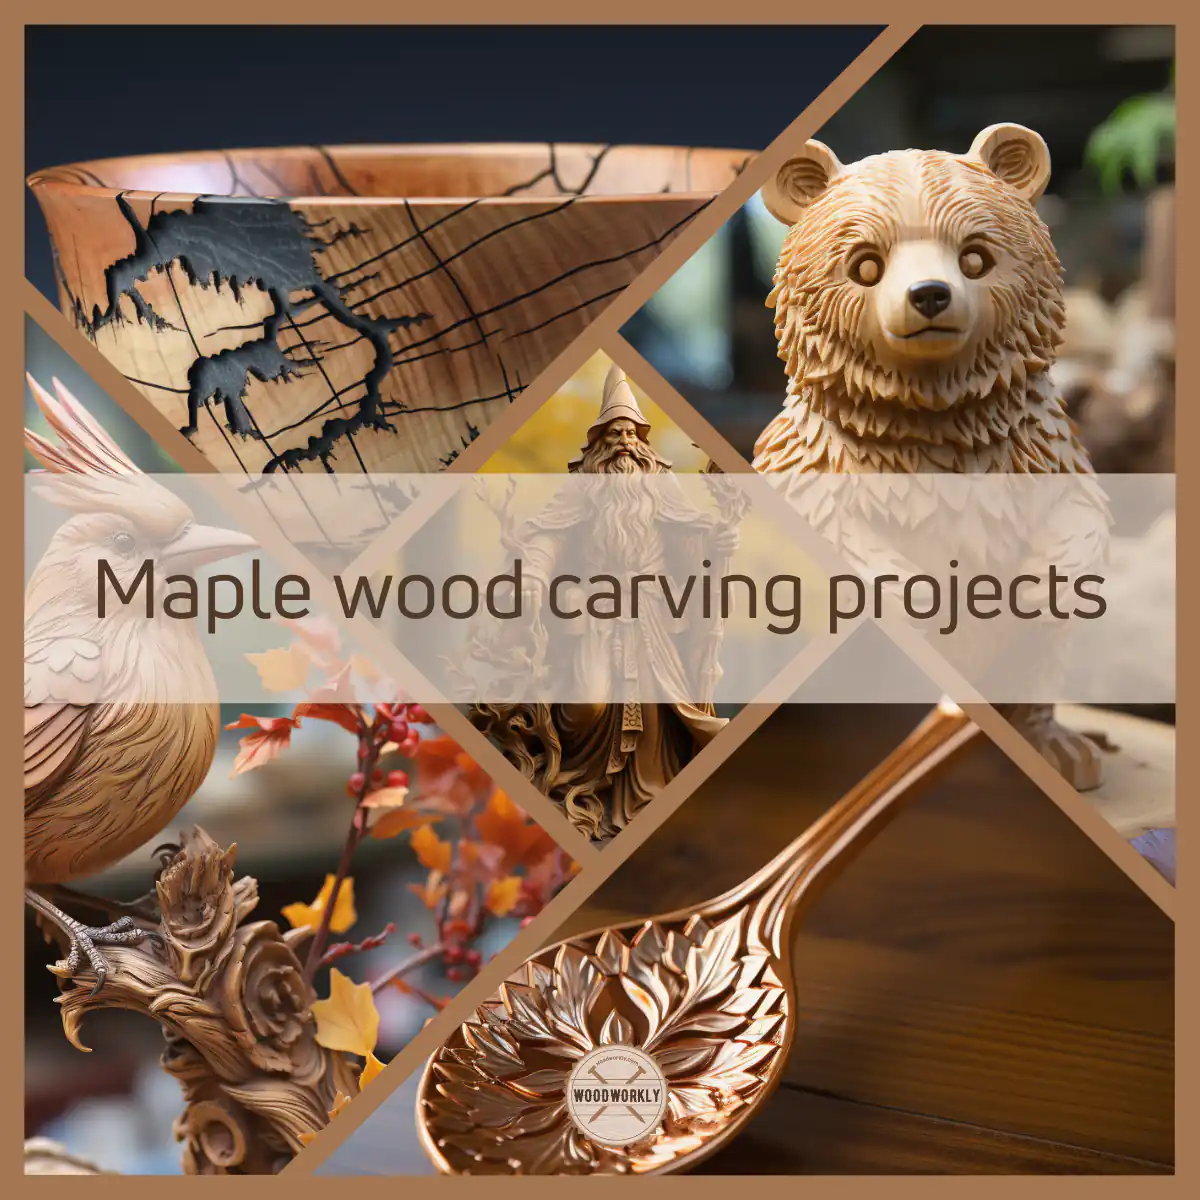 Maple wood carving projects